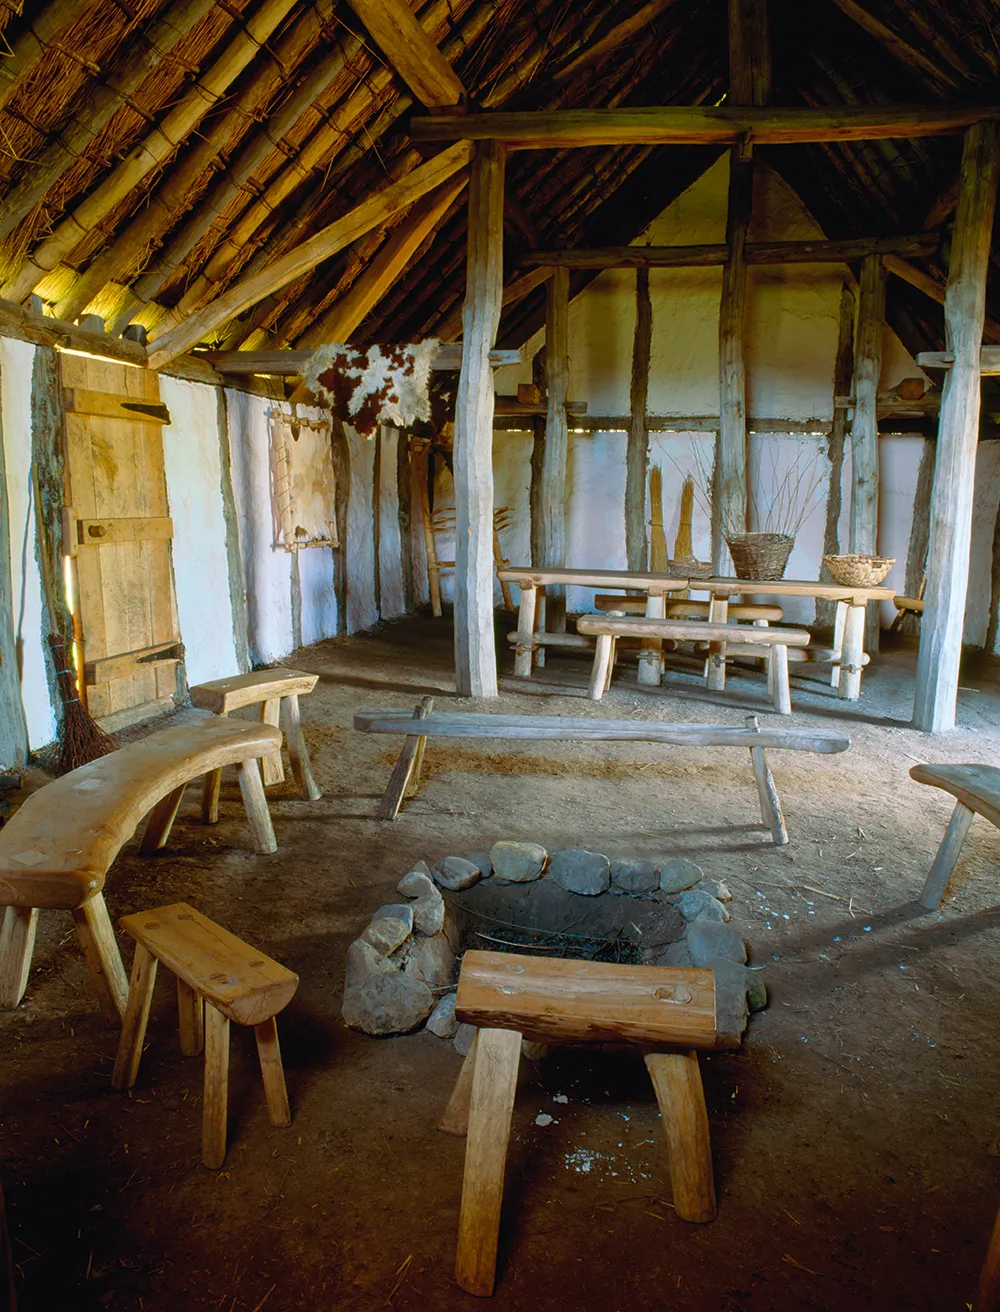 Step into medieval life in the ancient the Anglo-Saxon village of West Stow in Suffolk